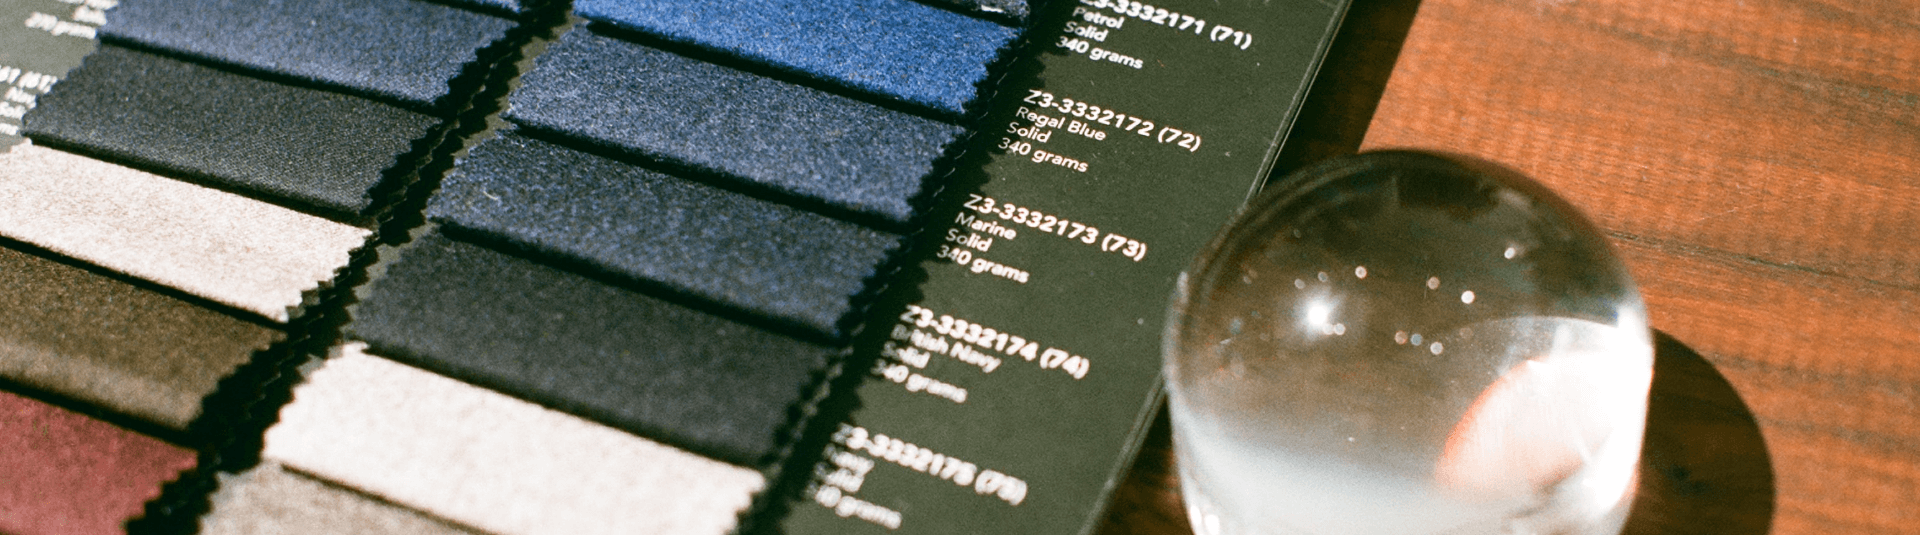 Clothing Swatch Sample Book